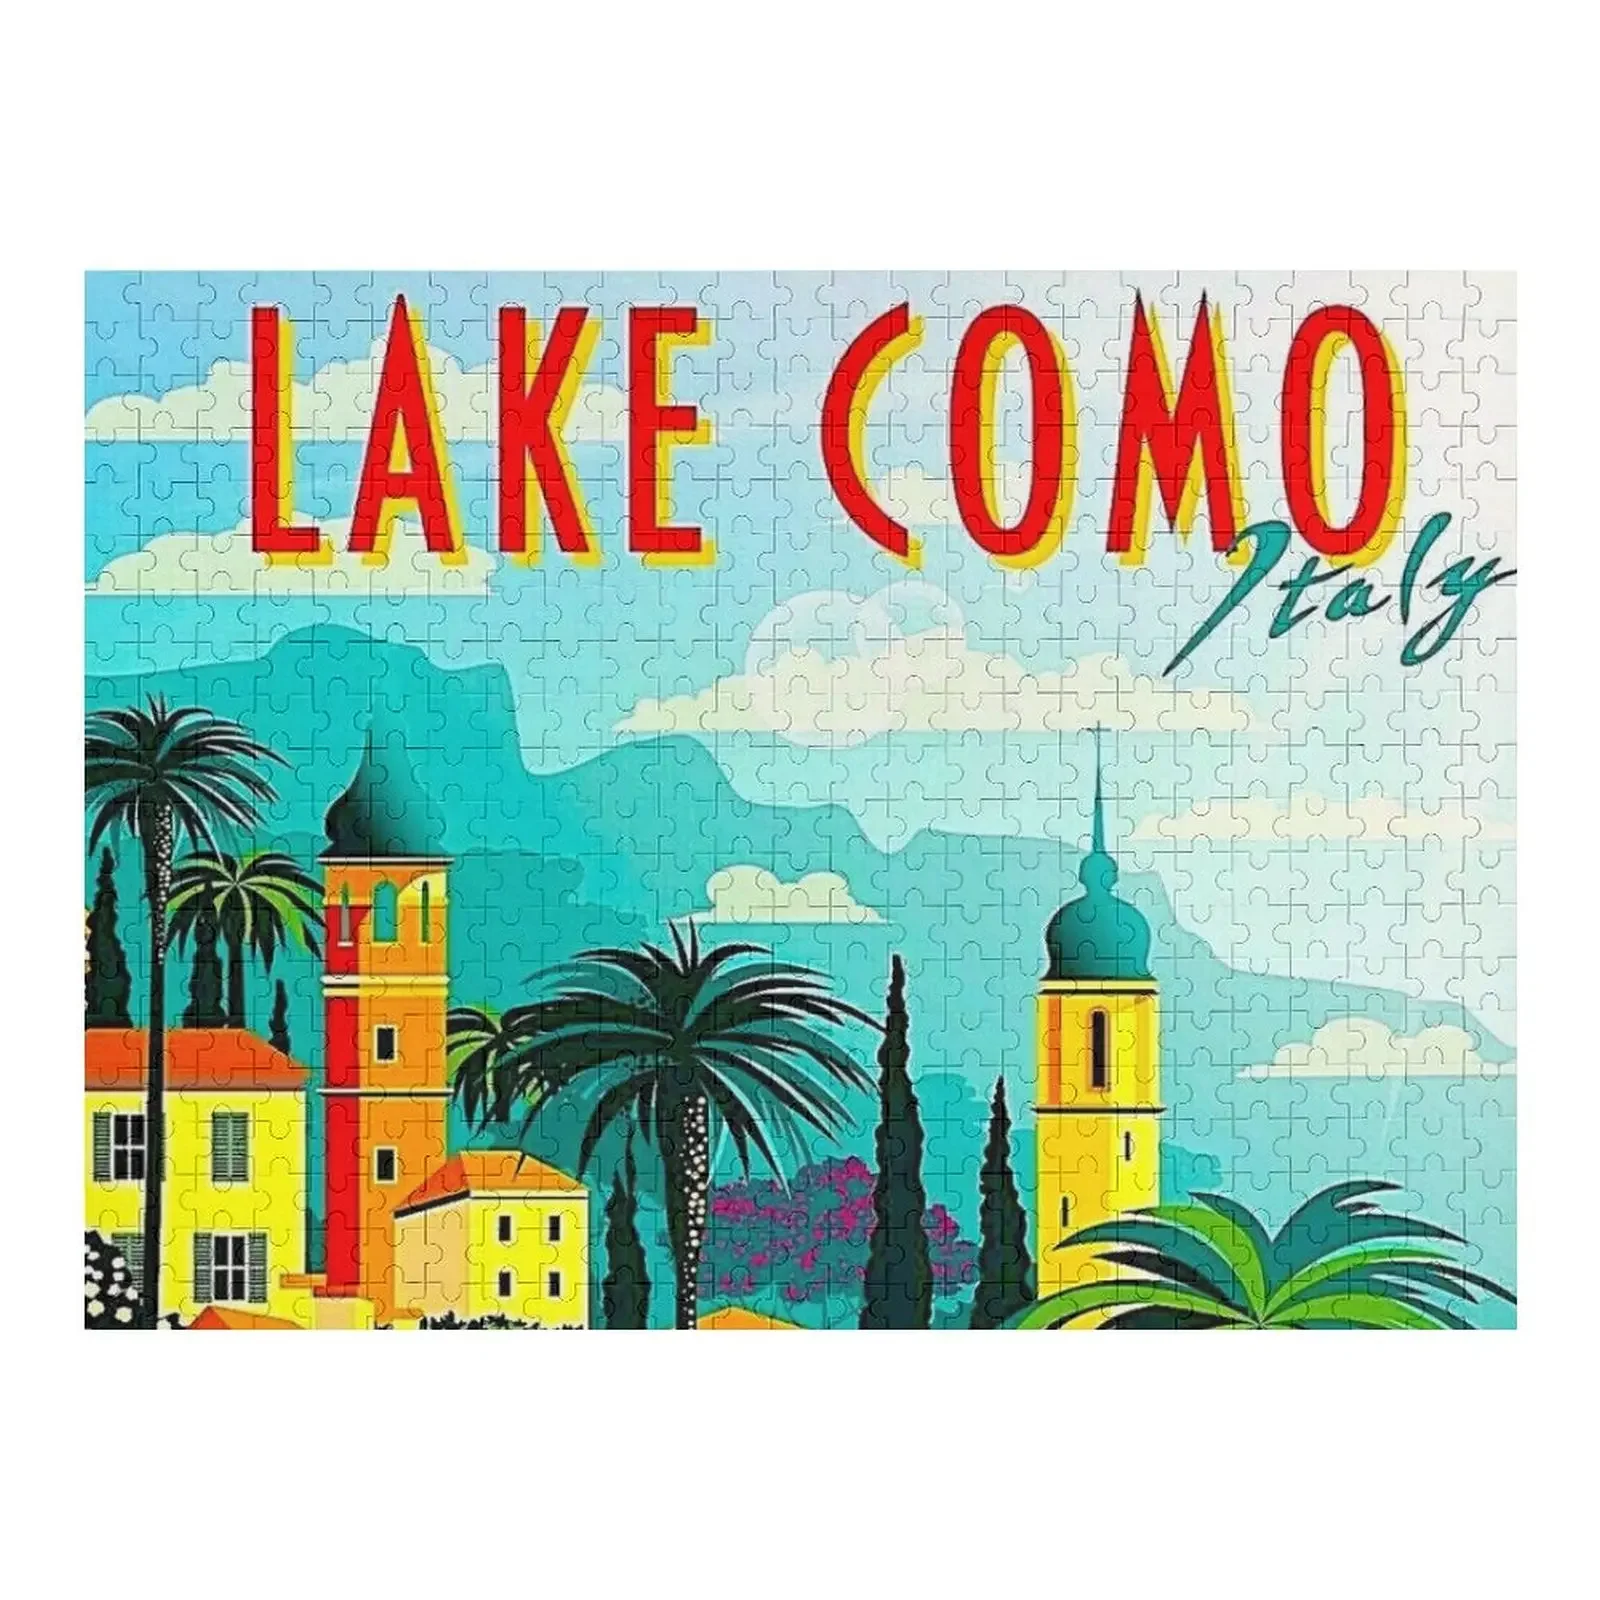 

LAKE COMO ITALY: Vintage Travel and Tourism Advertising Print Jigsaw Puzzle Scale Motors Personalised Name Puzzle